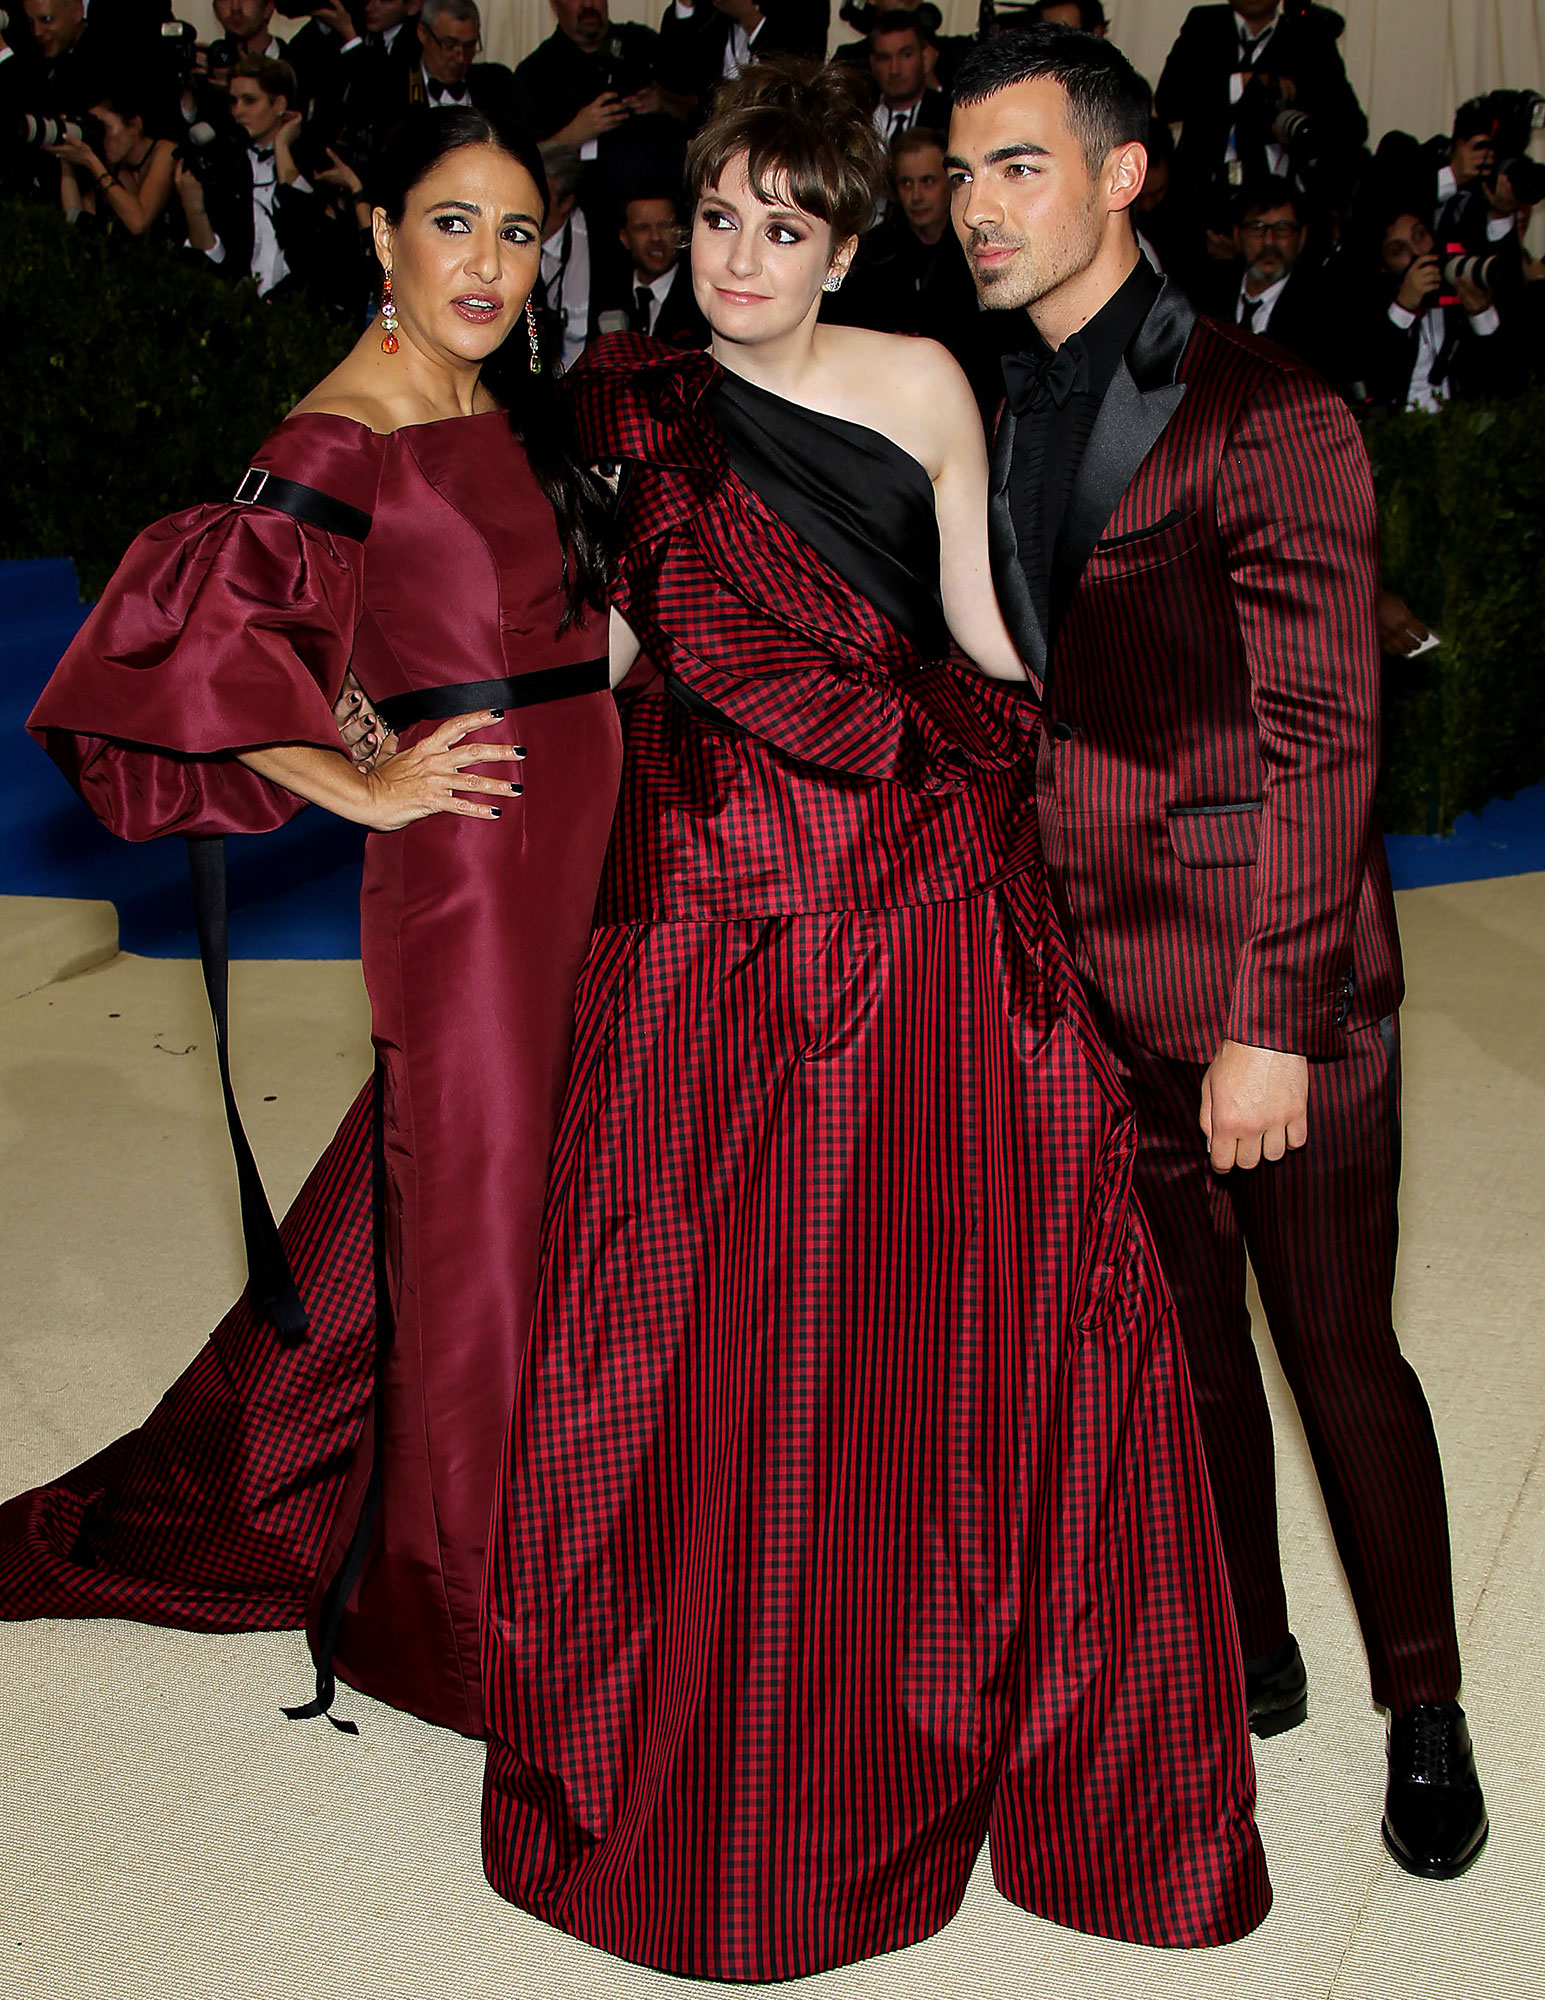 Funniest Celeb Met Gala Moments and Photos Through the Years